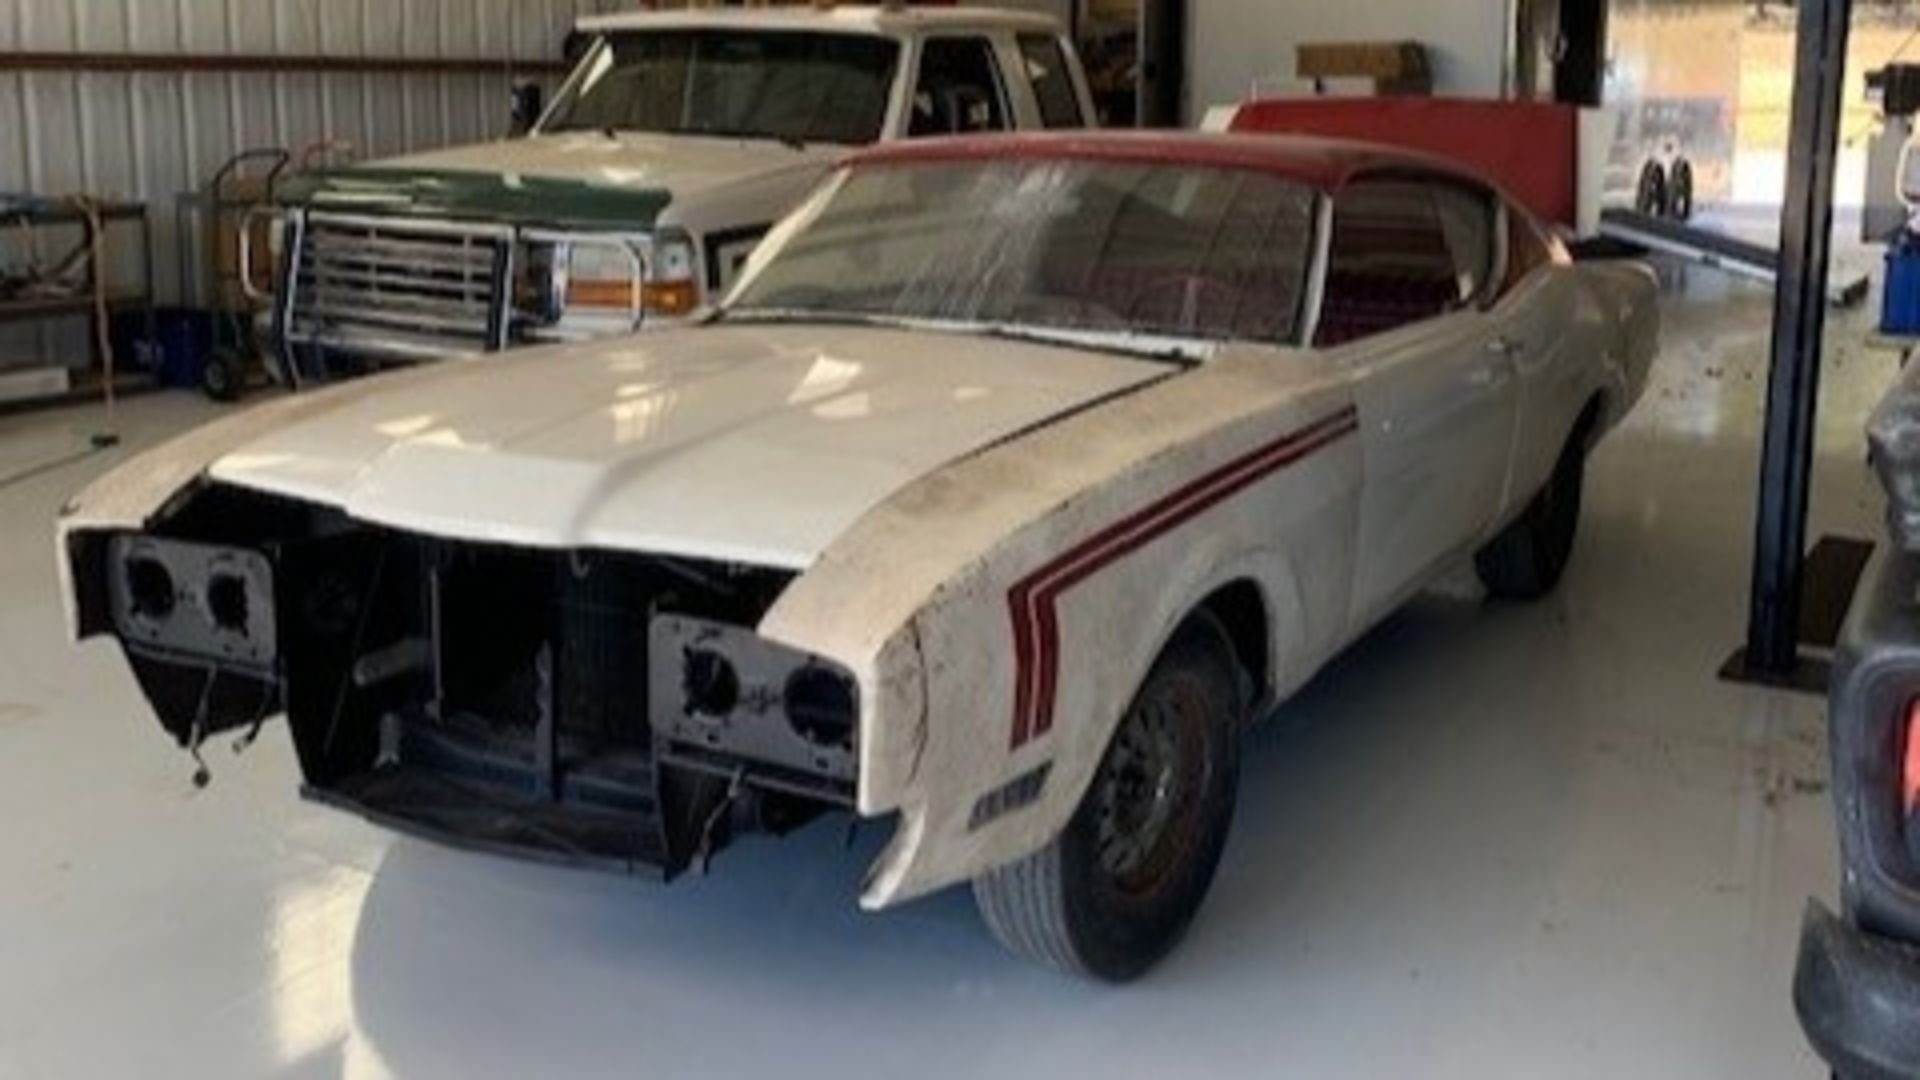 1969 Mercury Cyclone Spoiler II Cale Yarborough Edition PROJECT CAR - Image 2 of 13